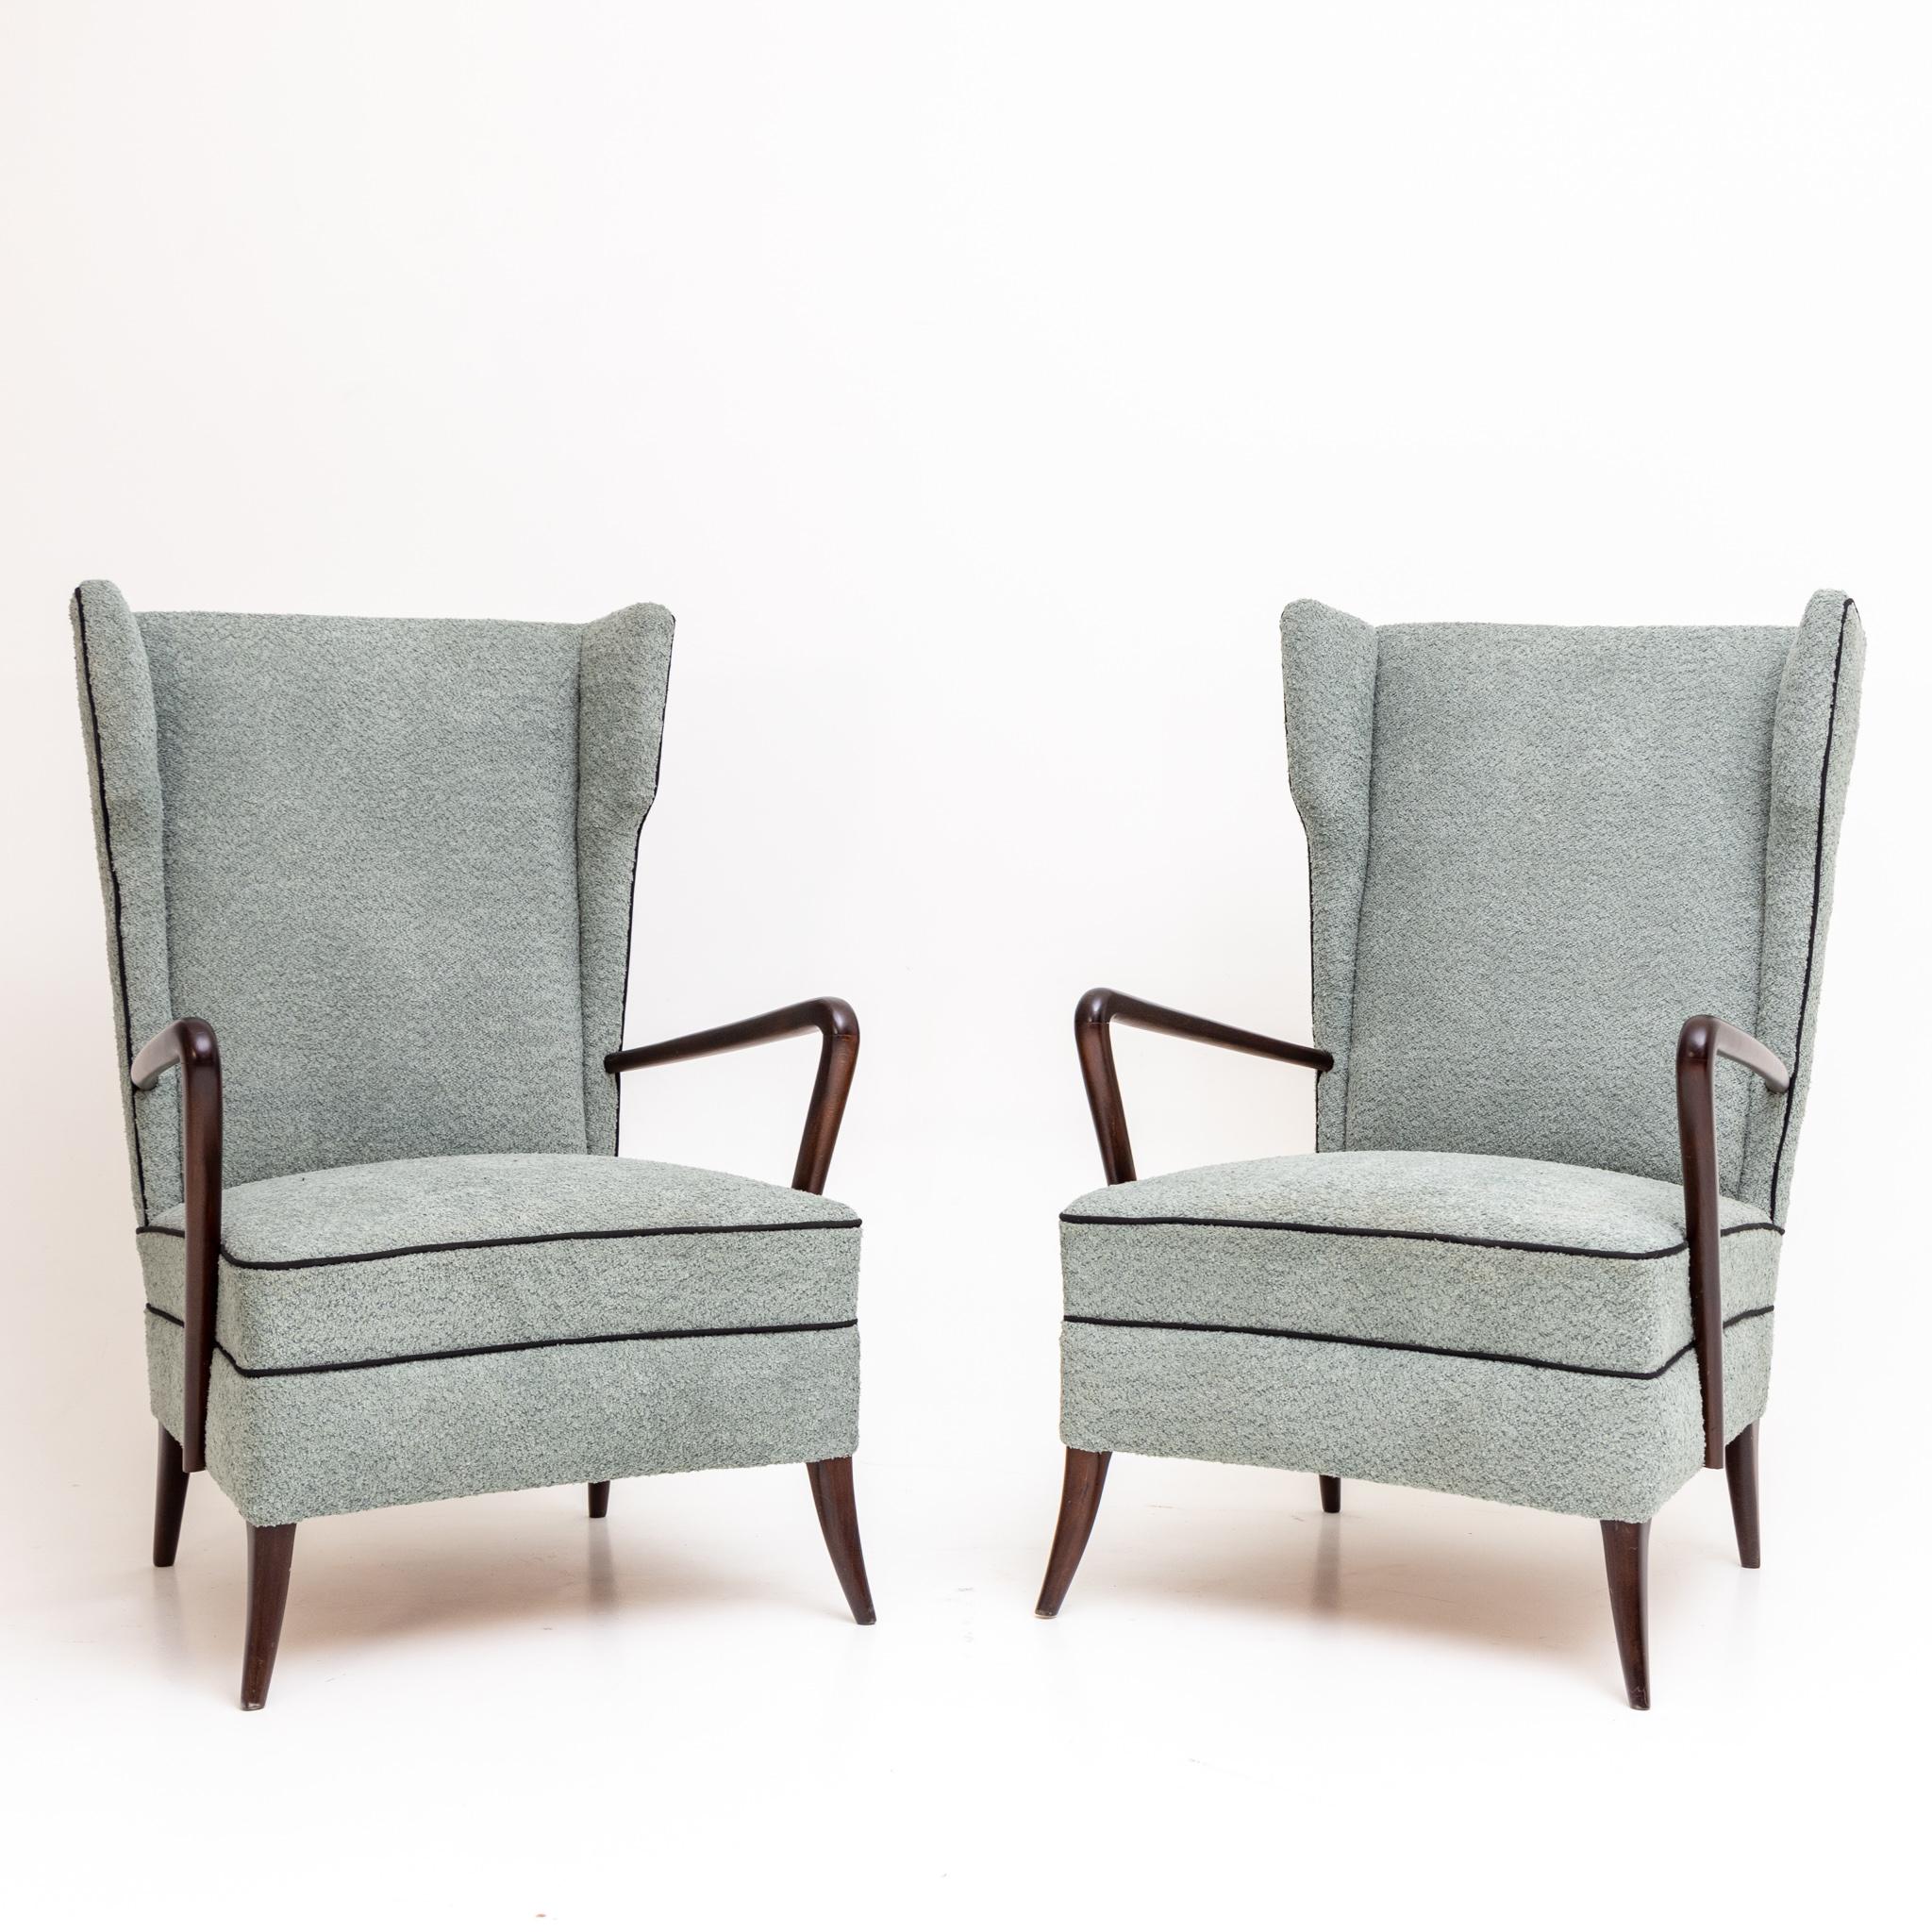 Modern Wingback Armchairs, Italy 1950s